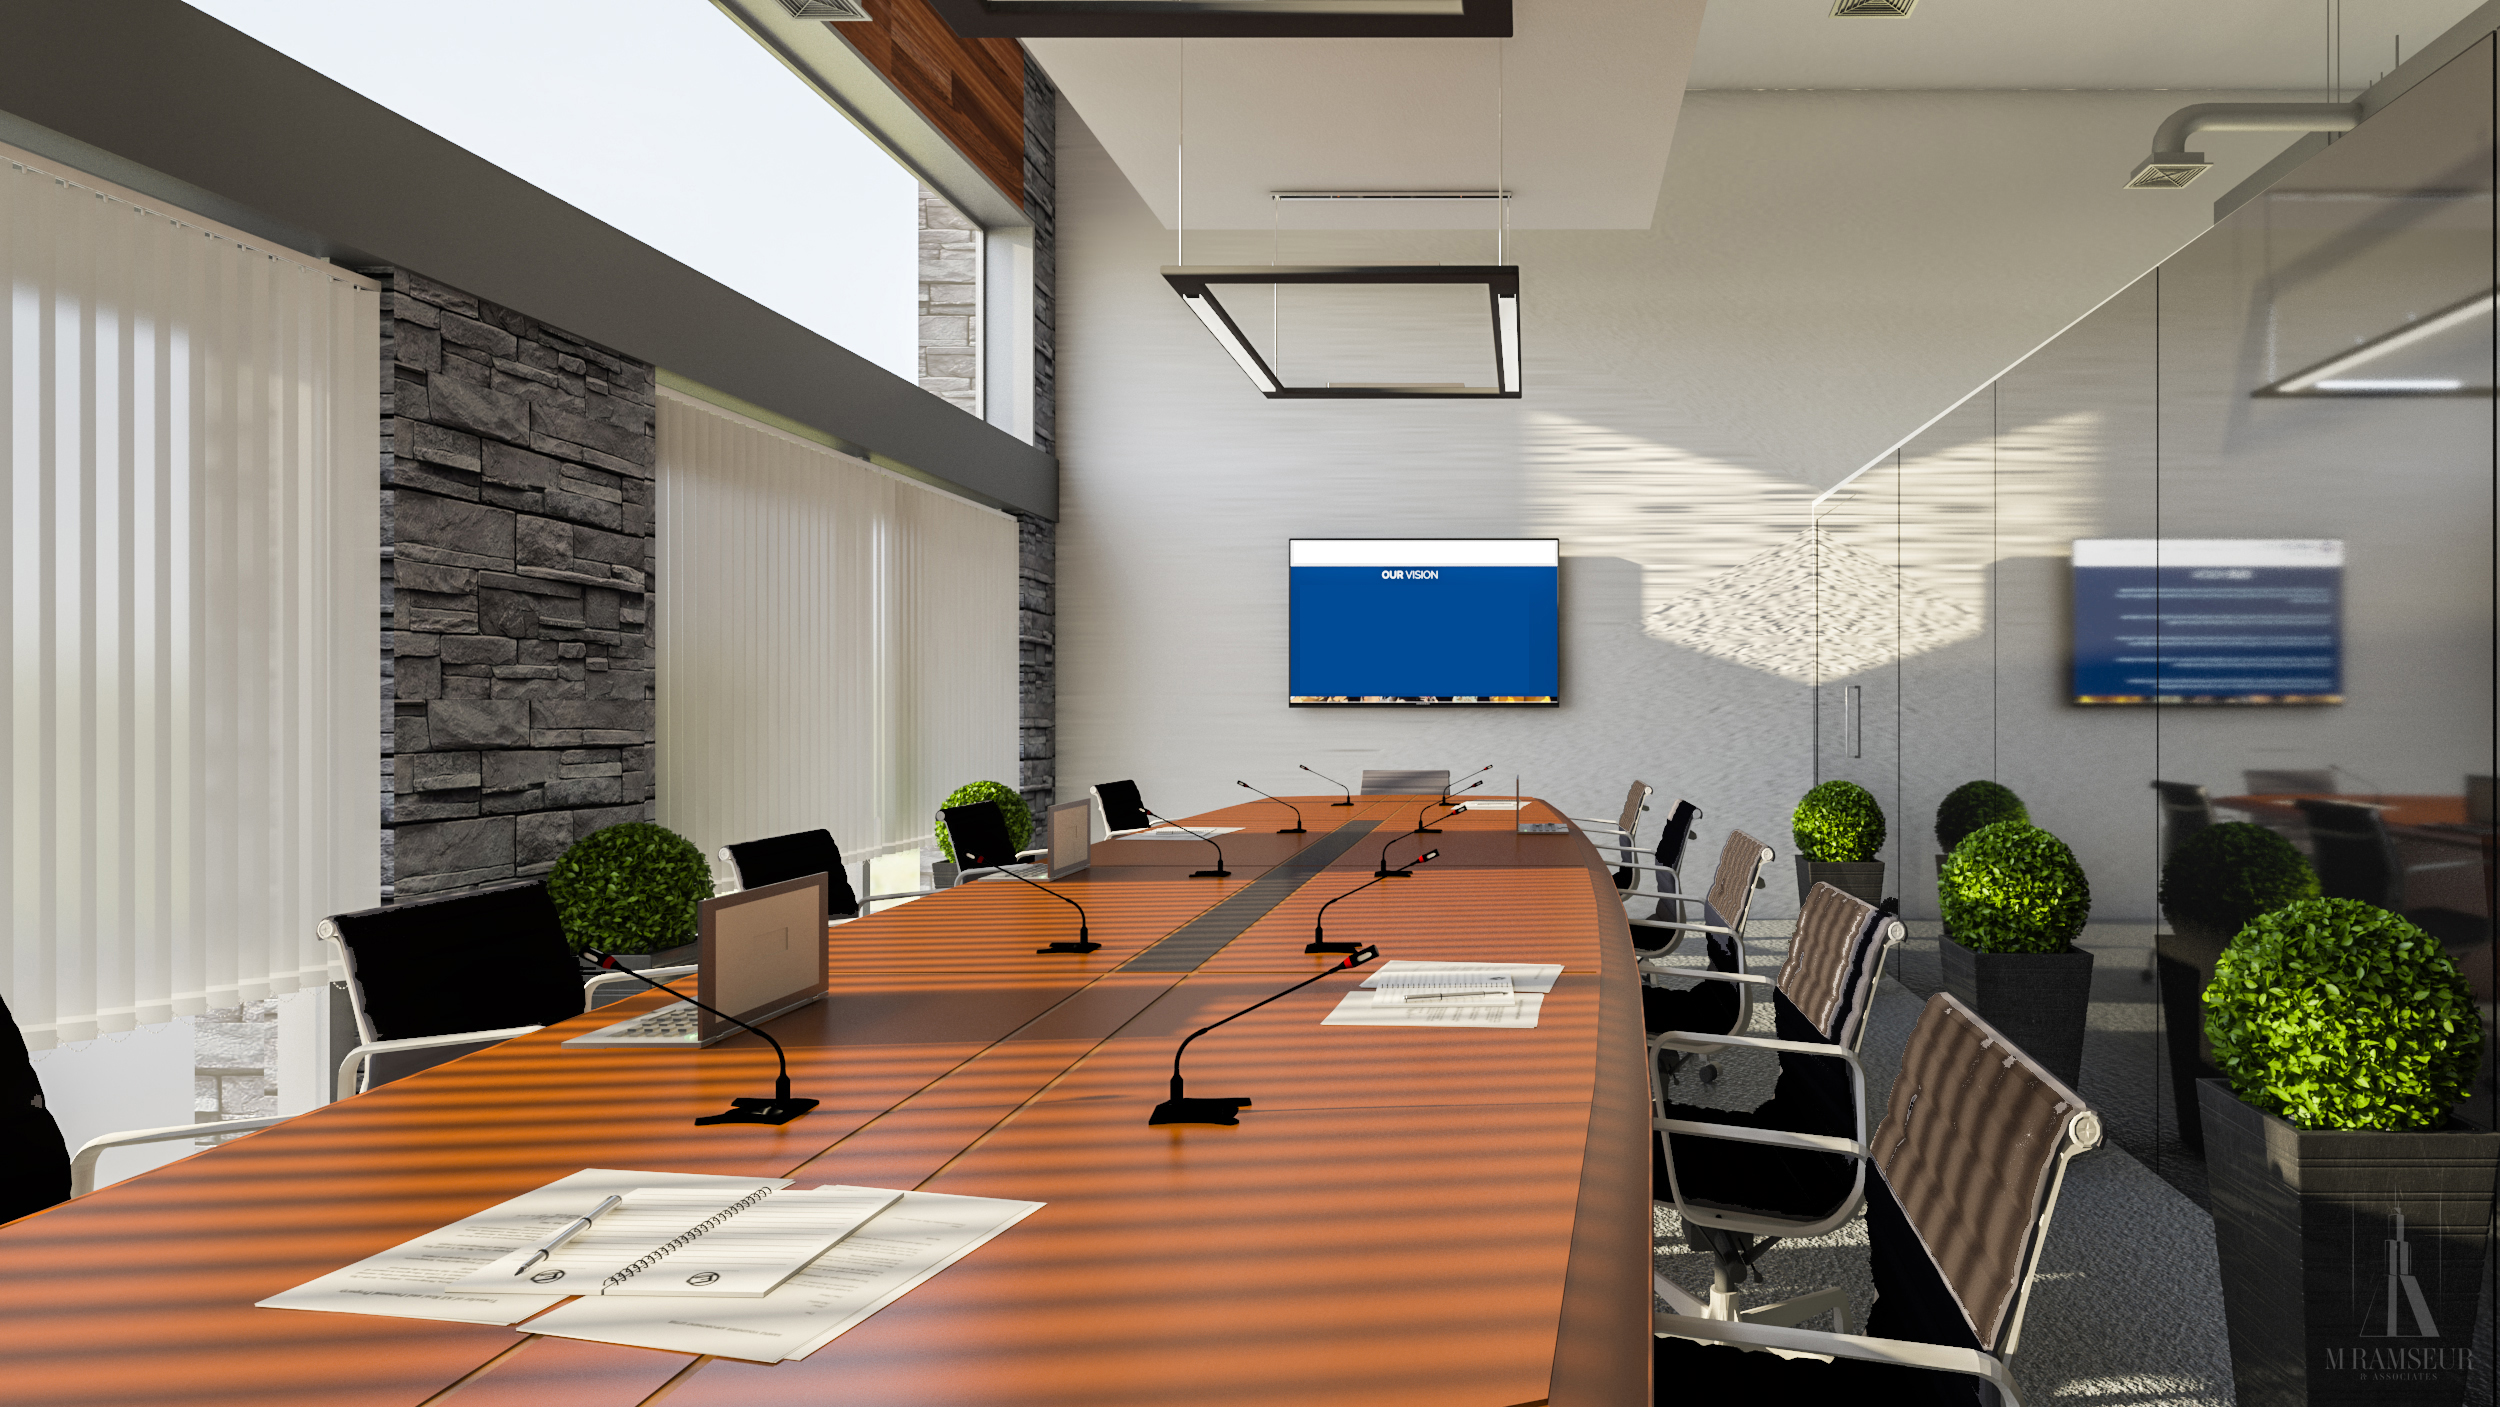 SCHEMATIC DESIGN LAW OFFICE CONCEPT CONFERENCE ROOM 1 RENDERING